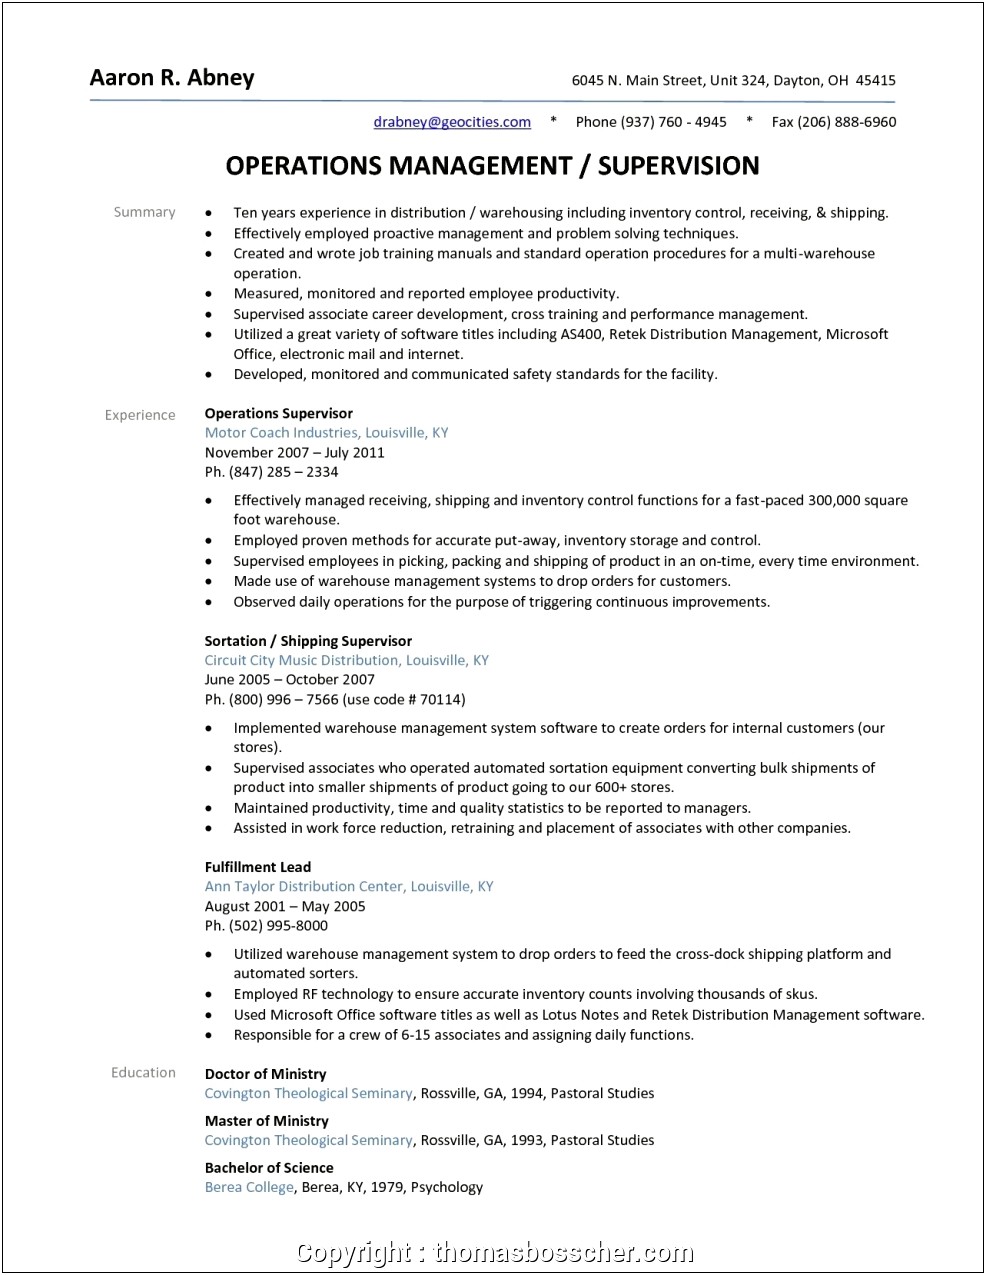 Draft Resume For Warehouse Manager